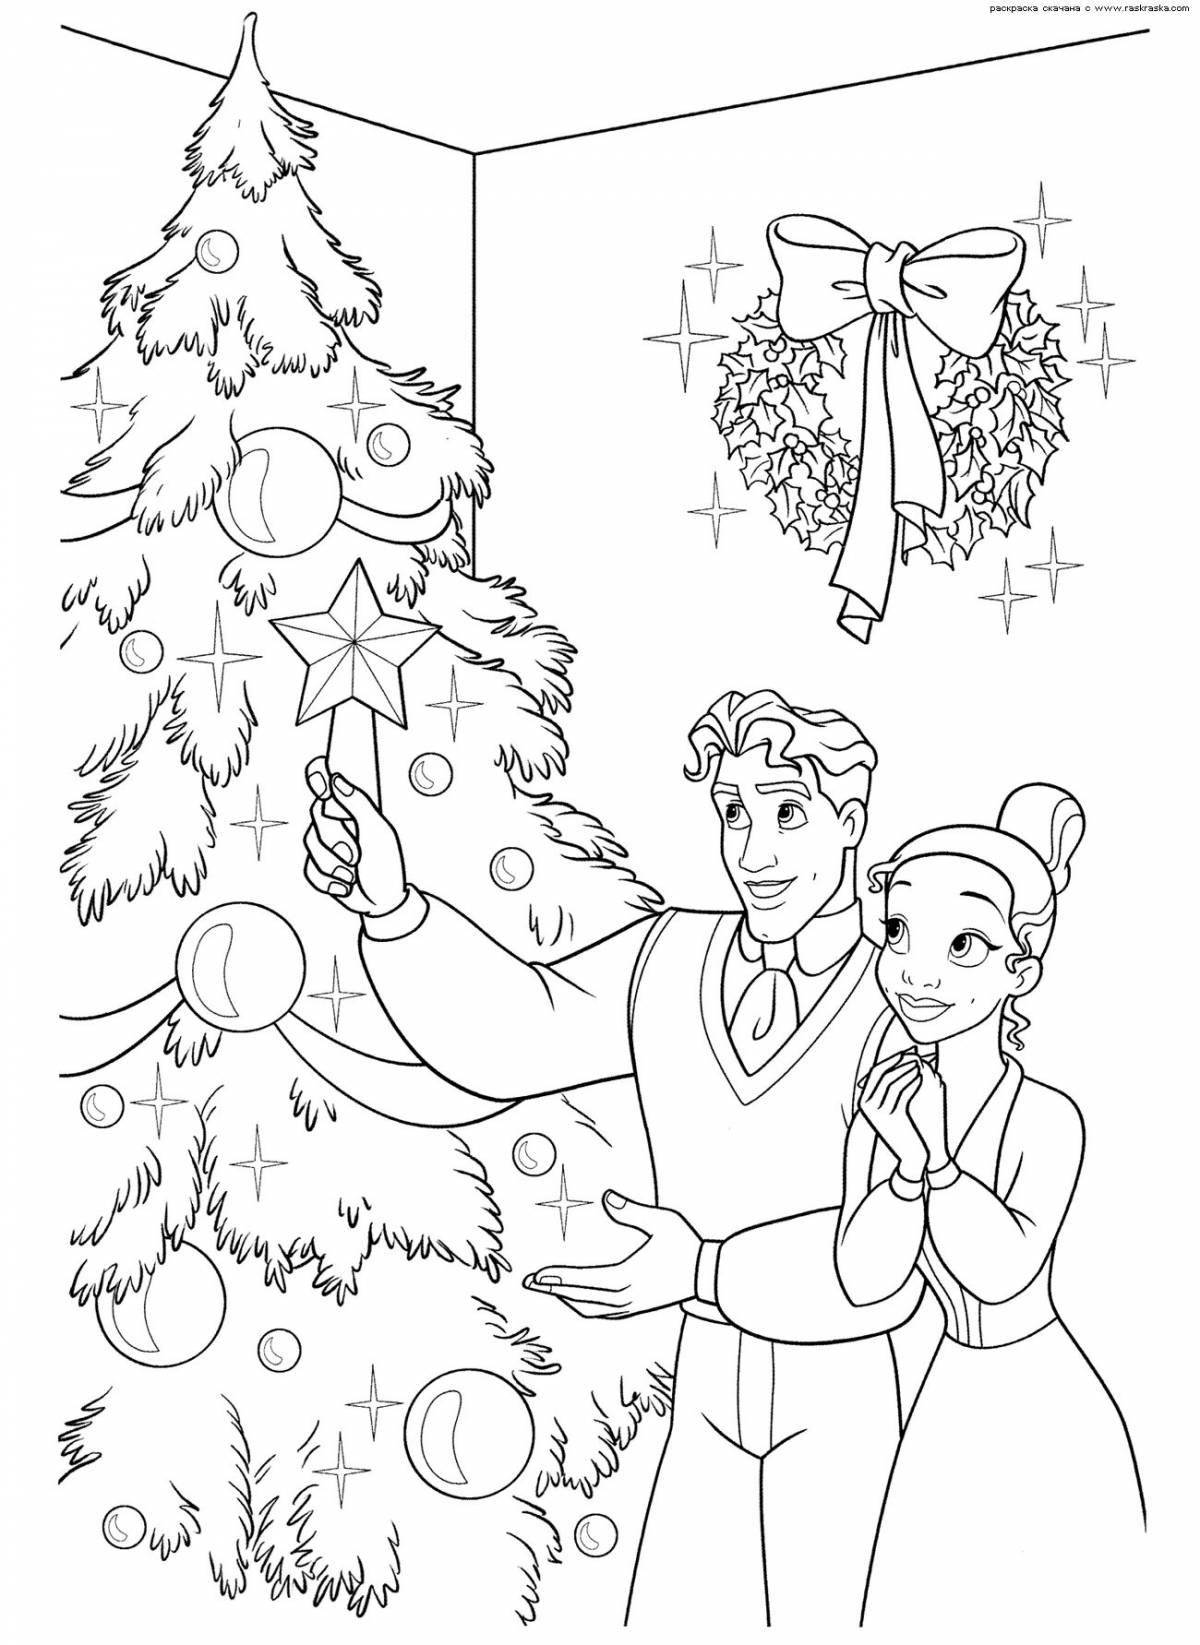 Awesome Disney Christmas coloring book